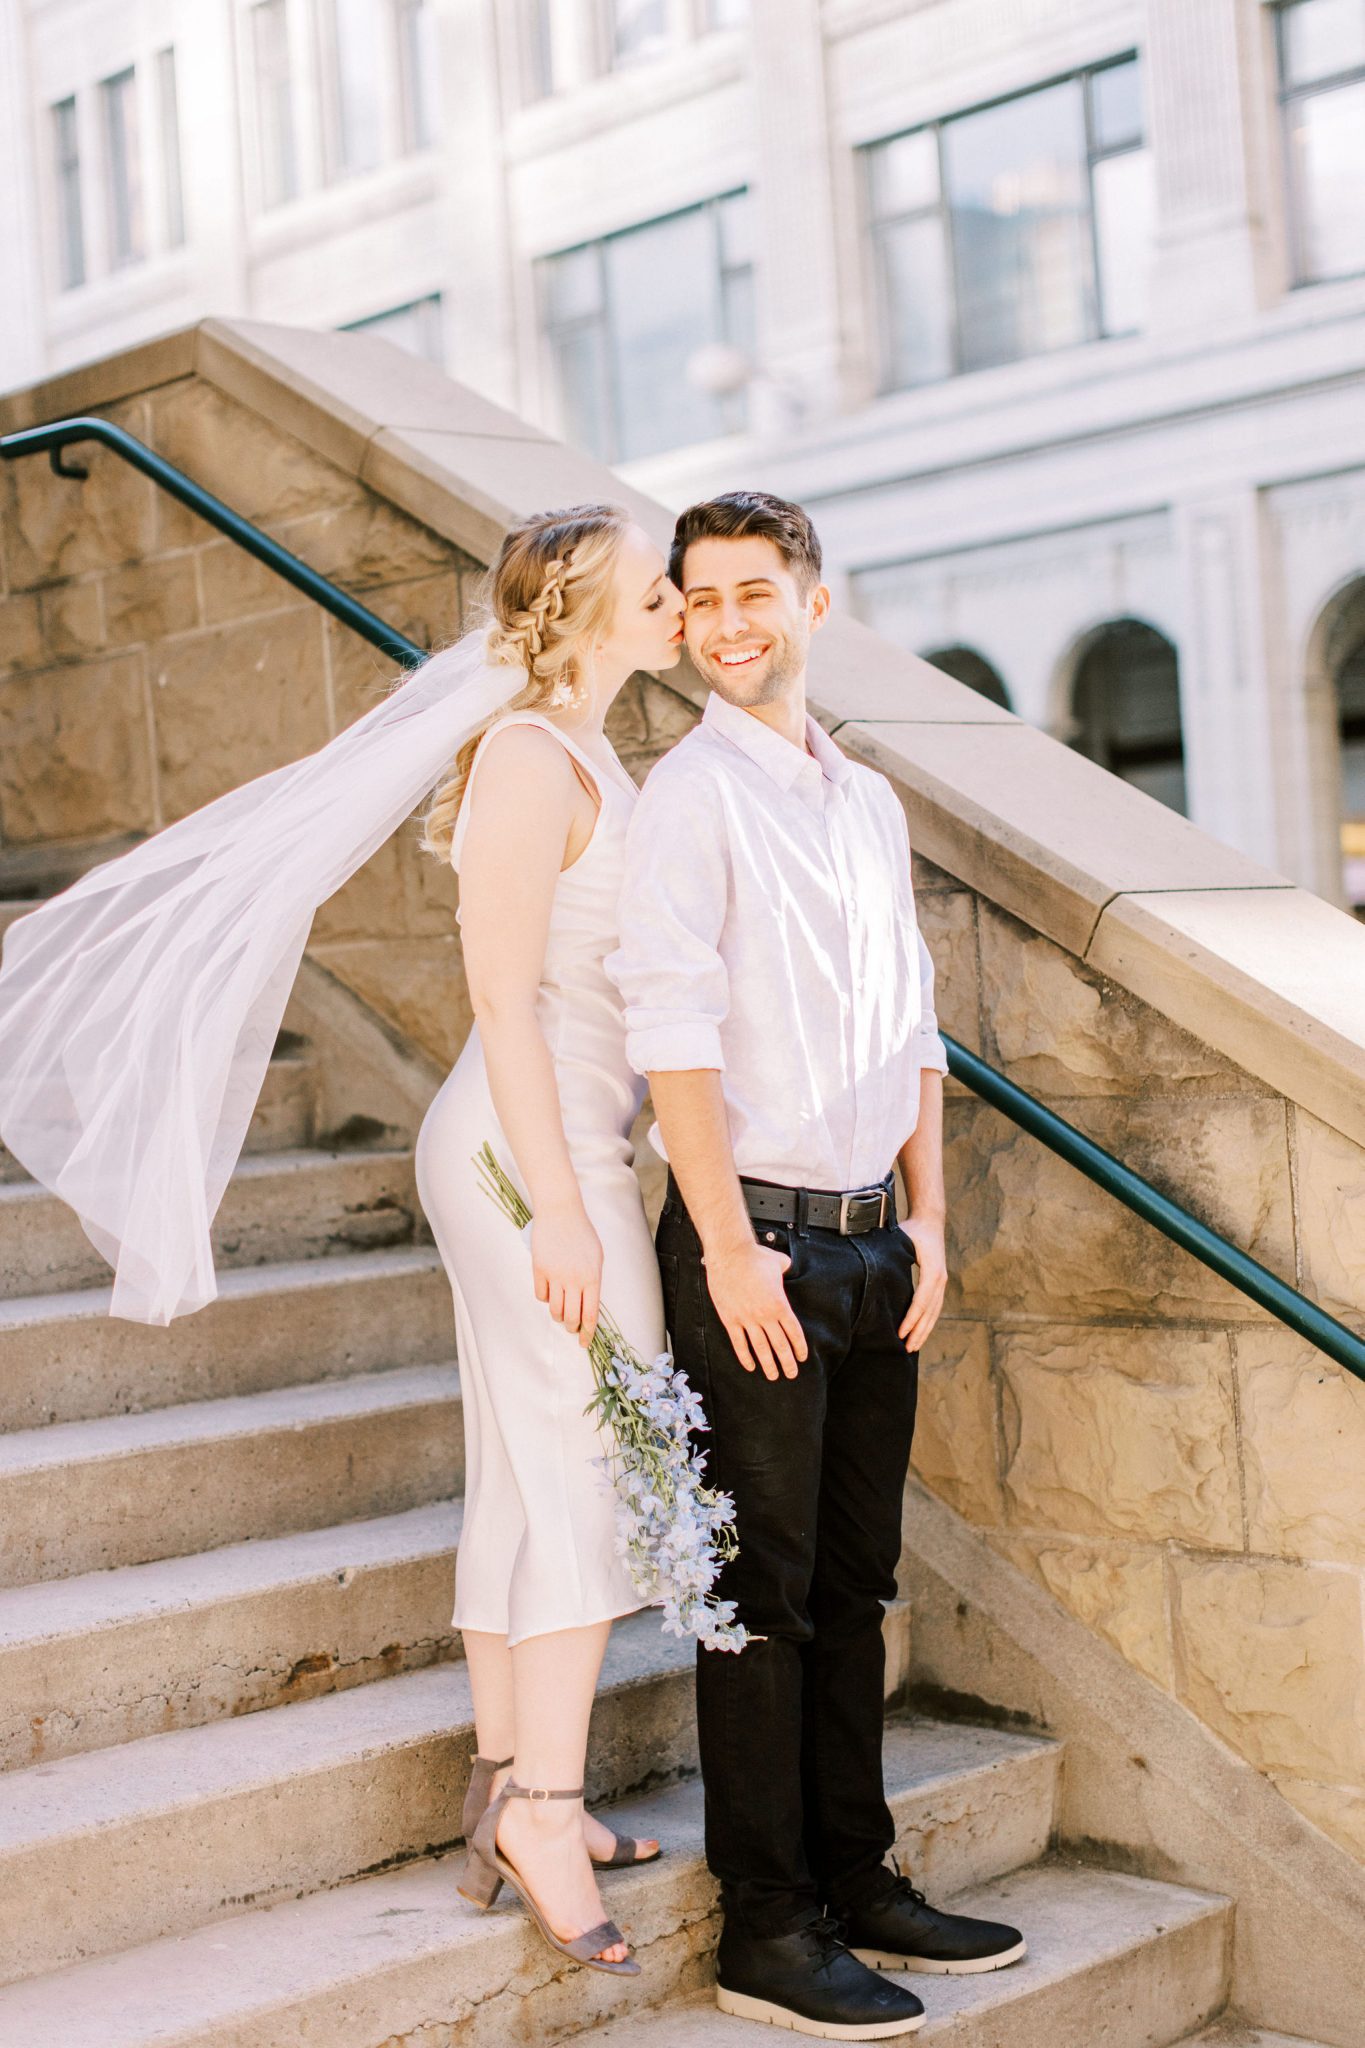 Bride and groom pose on city steps in the heart of downtown Calgary for this modern elopement shoot with hints of a European getaway